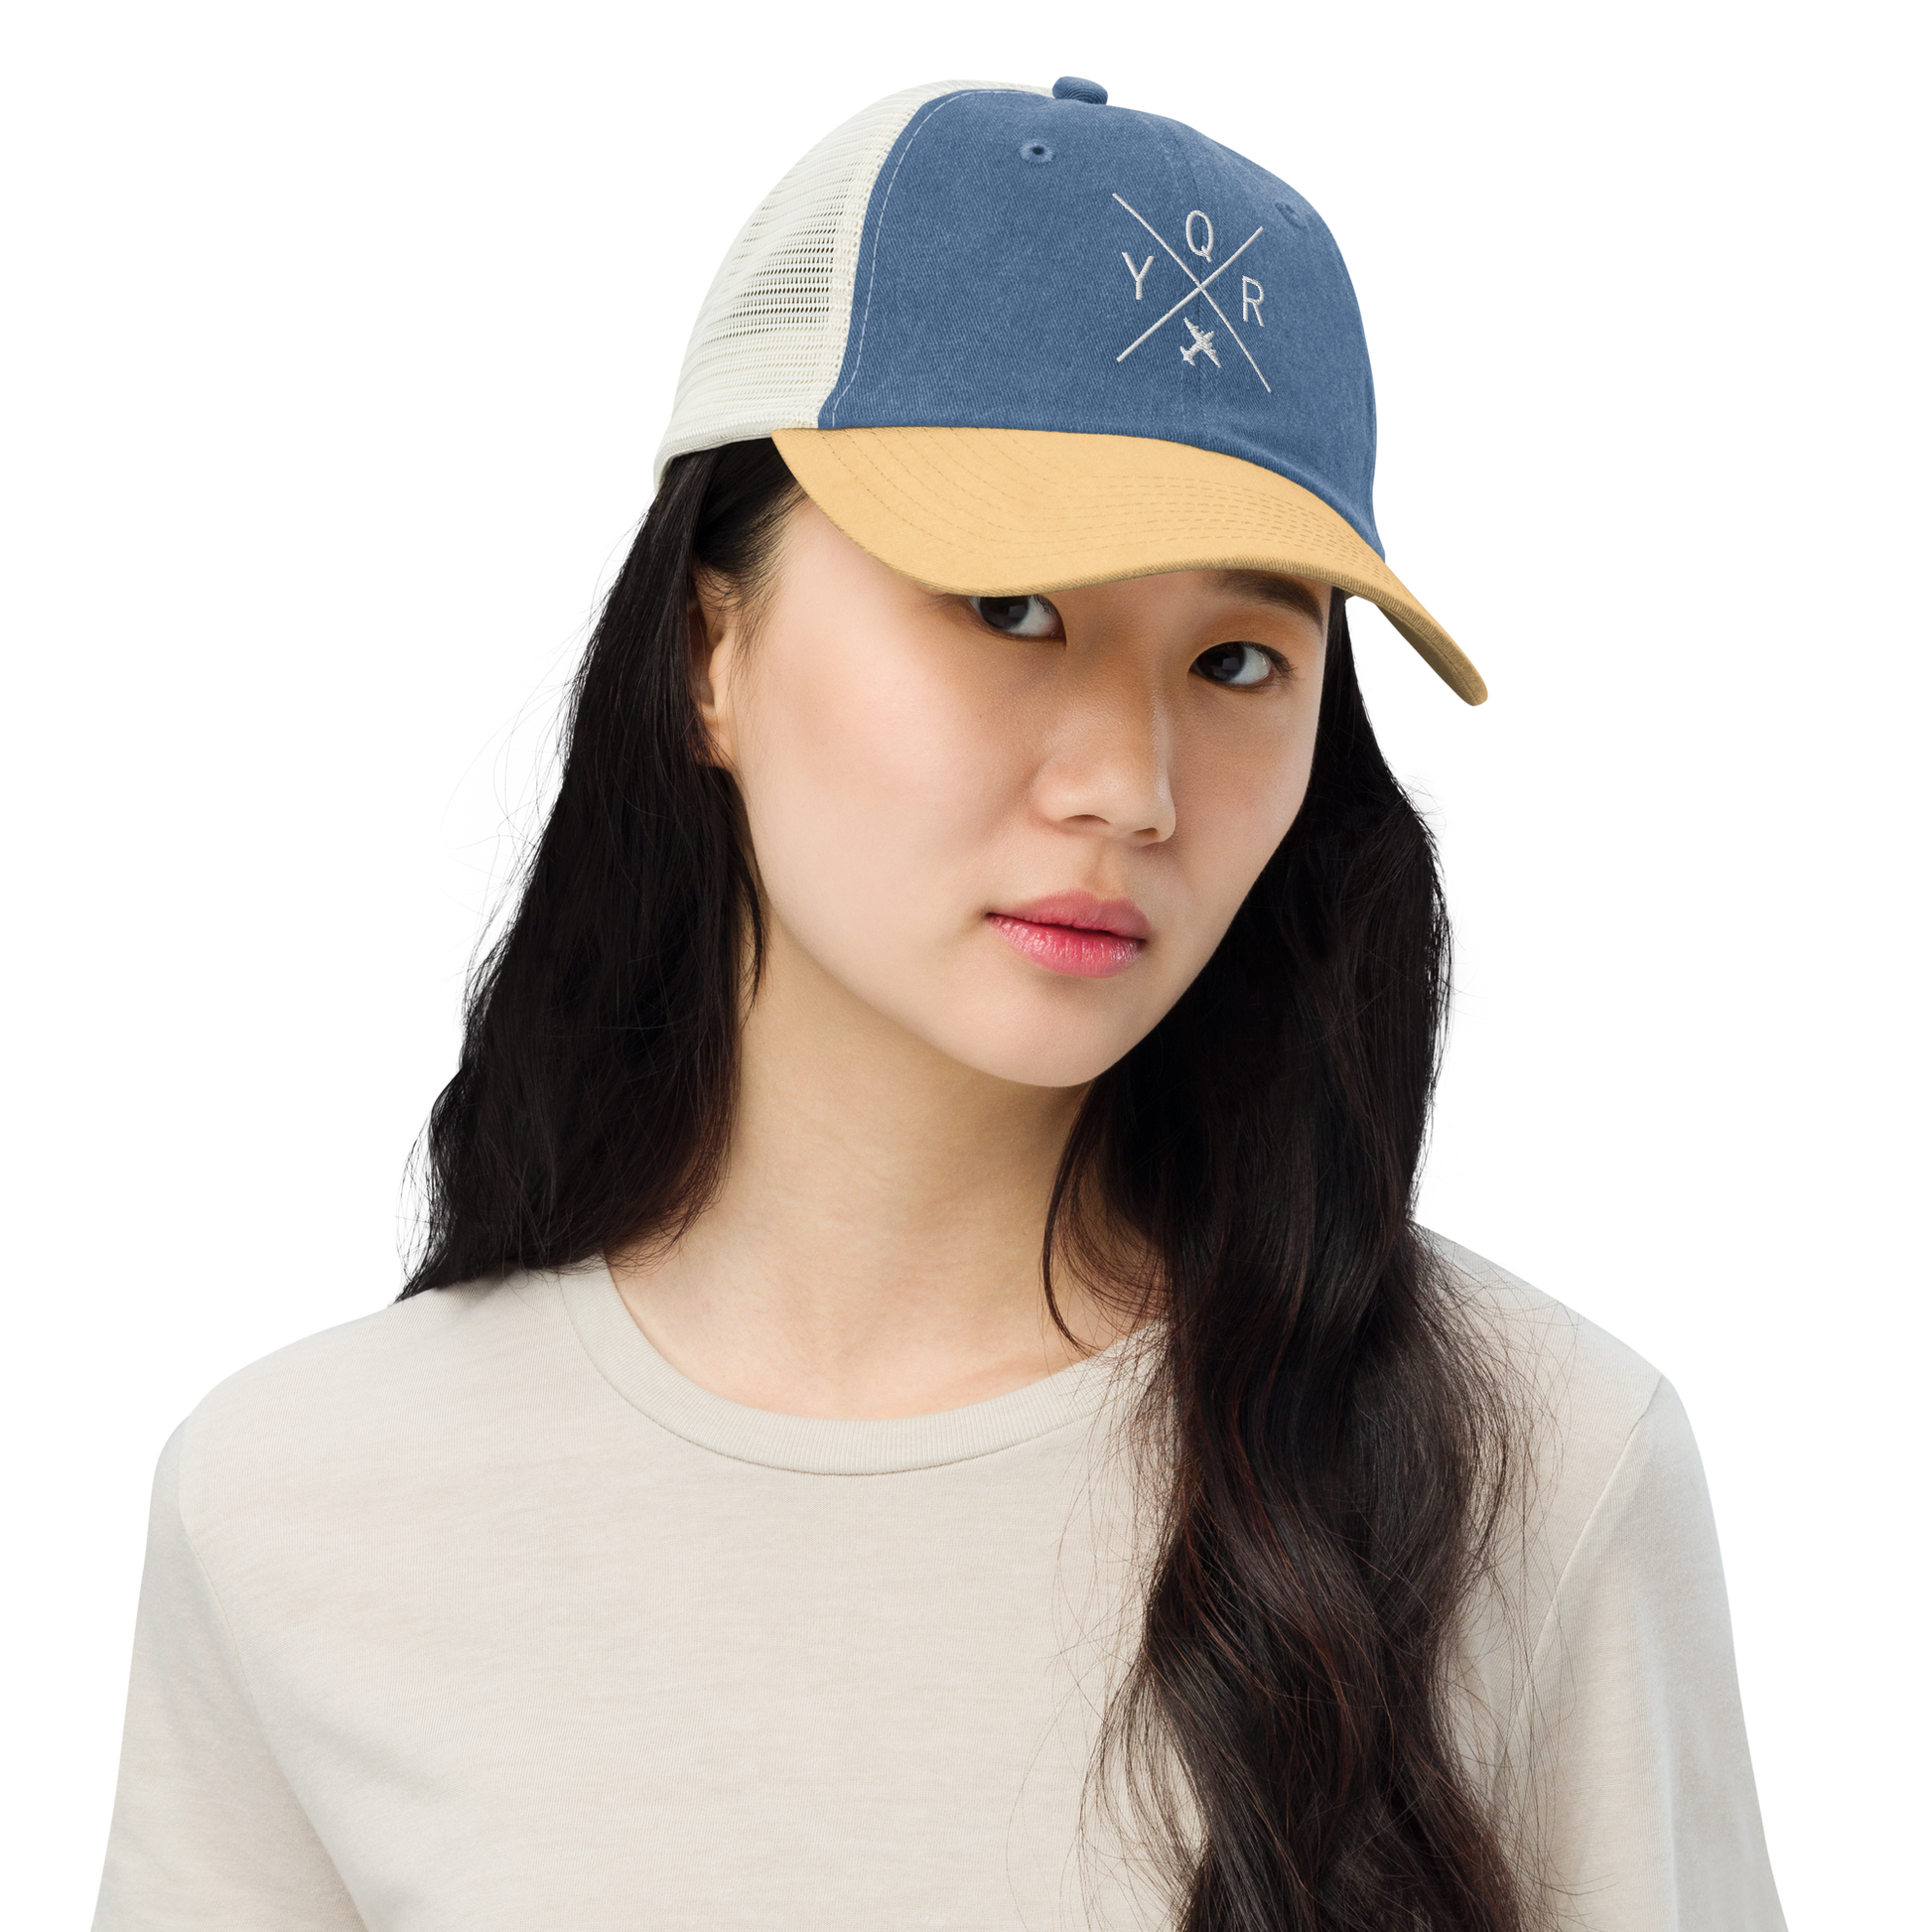 YHM Designs - YQR Regina Pigment-Dyed Trucker Cap - Crossed-X Design with Airport Code and Vintage Propliner - White Embroidery - Image 03